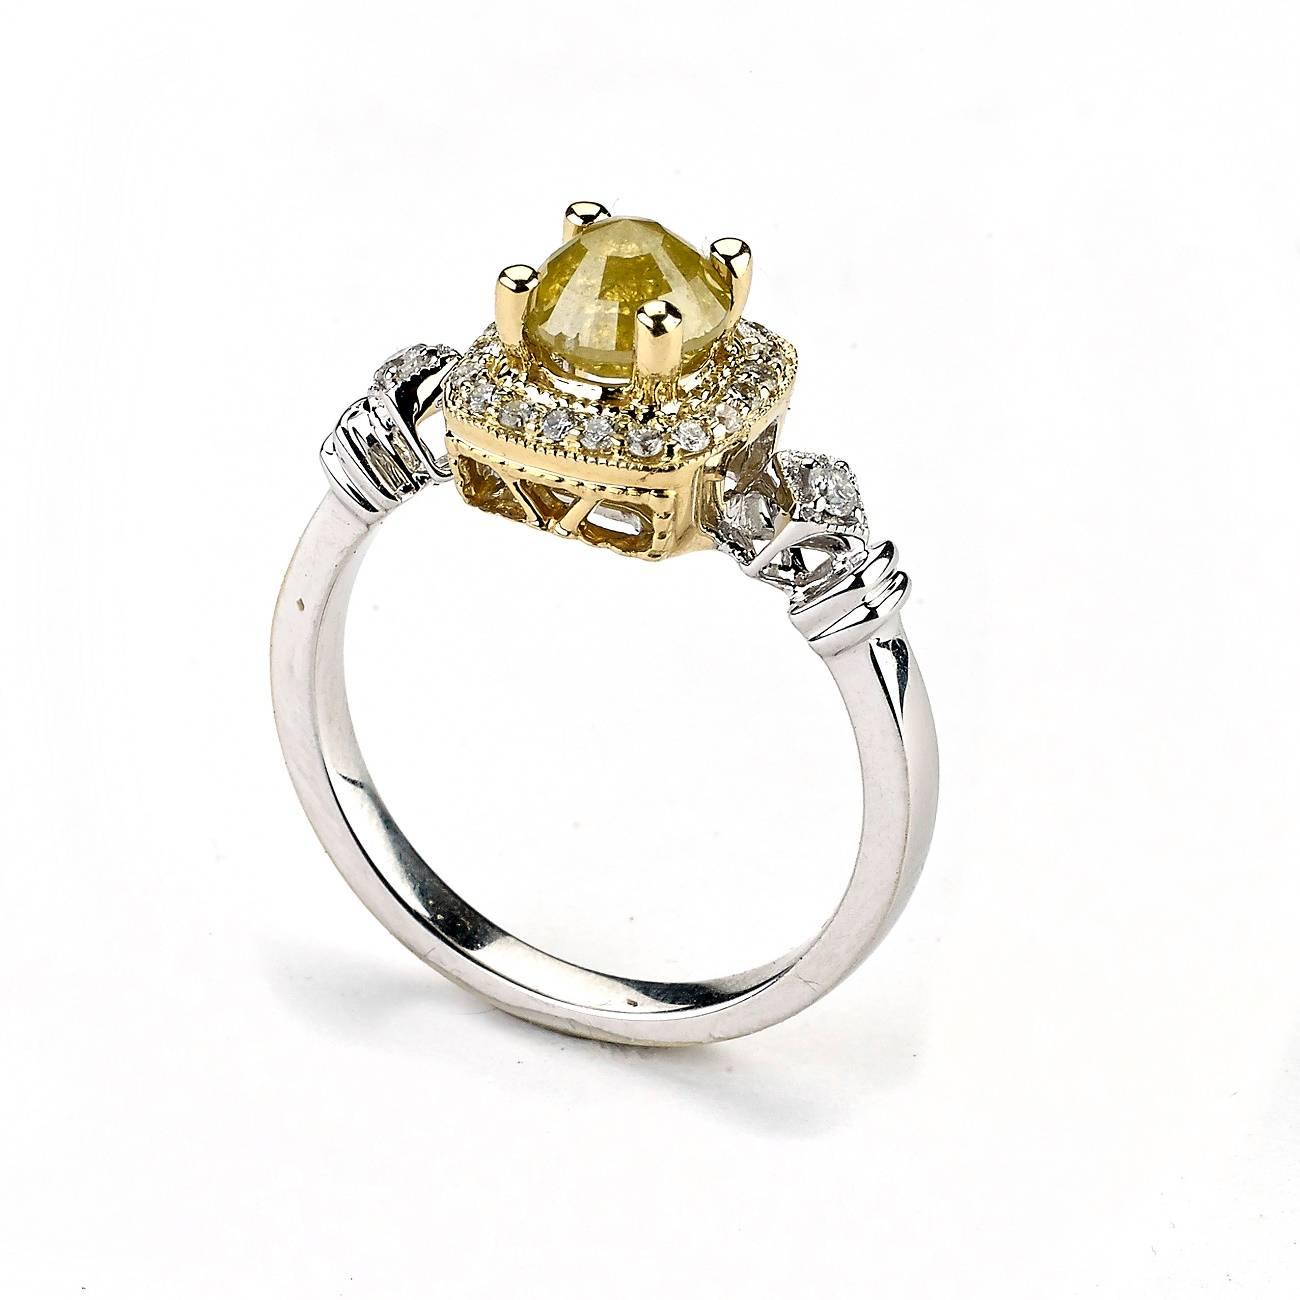 This Ring features a Fancy Yellow Diamond Surrounded by White Diamond Accent and Lays in two Tone Yellow and White Setting.

Yellow Diamond: 1.08 Cts.
Diamond Cut: Cushion
Clarity; SI1-SI2
Color: Yellow
Setting : Prong

White Diamonds: